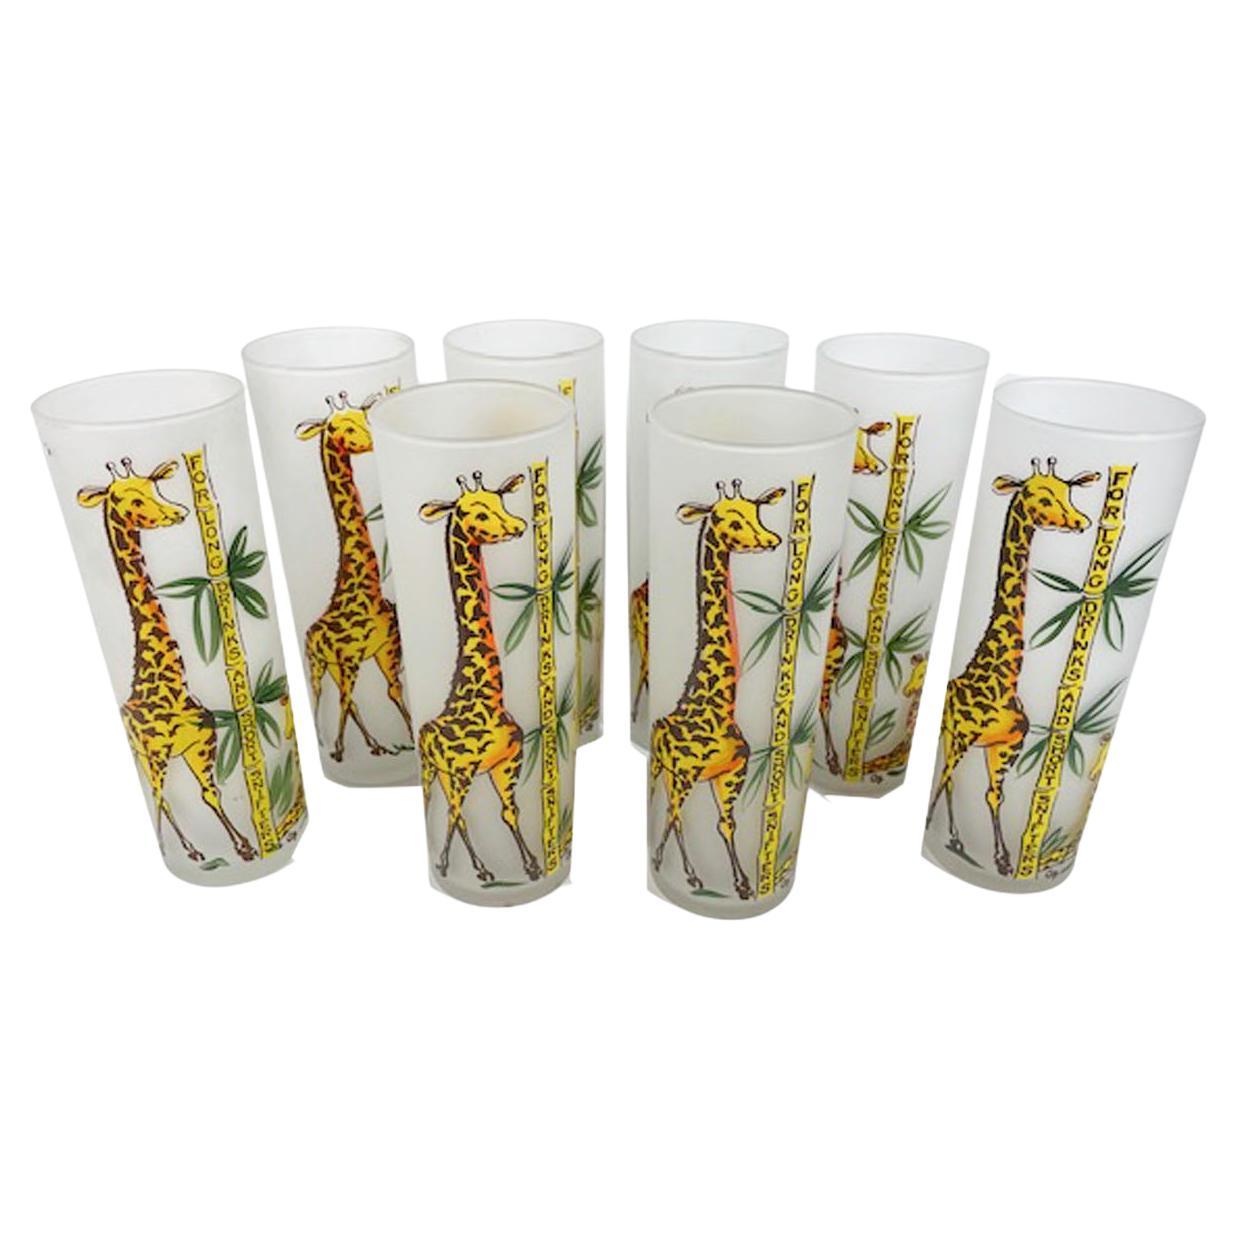 Vintage Wildlife Beer Glasses Set of 4 with Four Different Scenes by Libbey